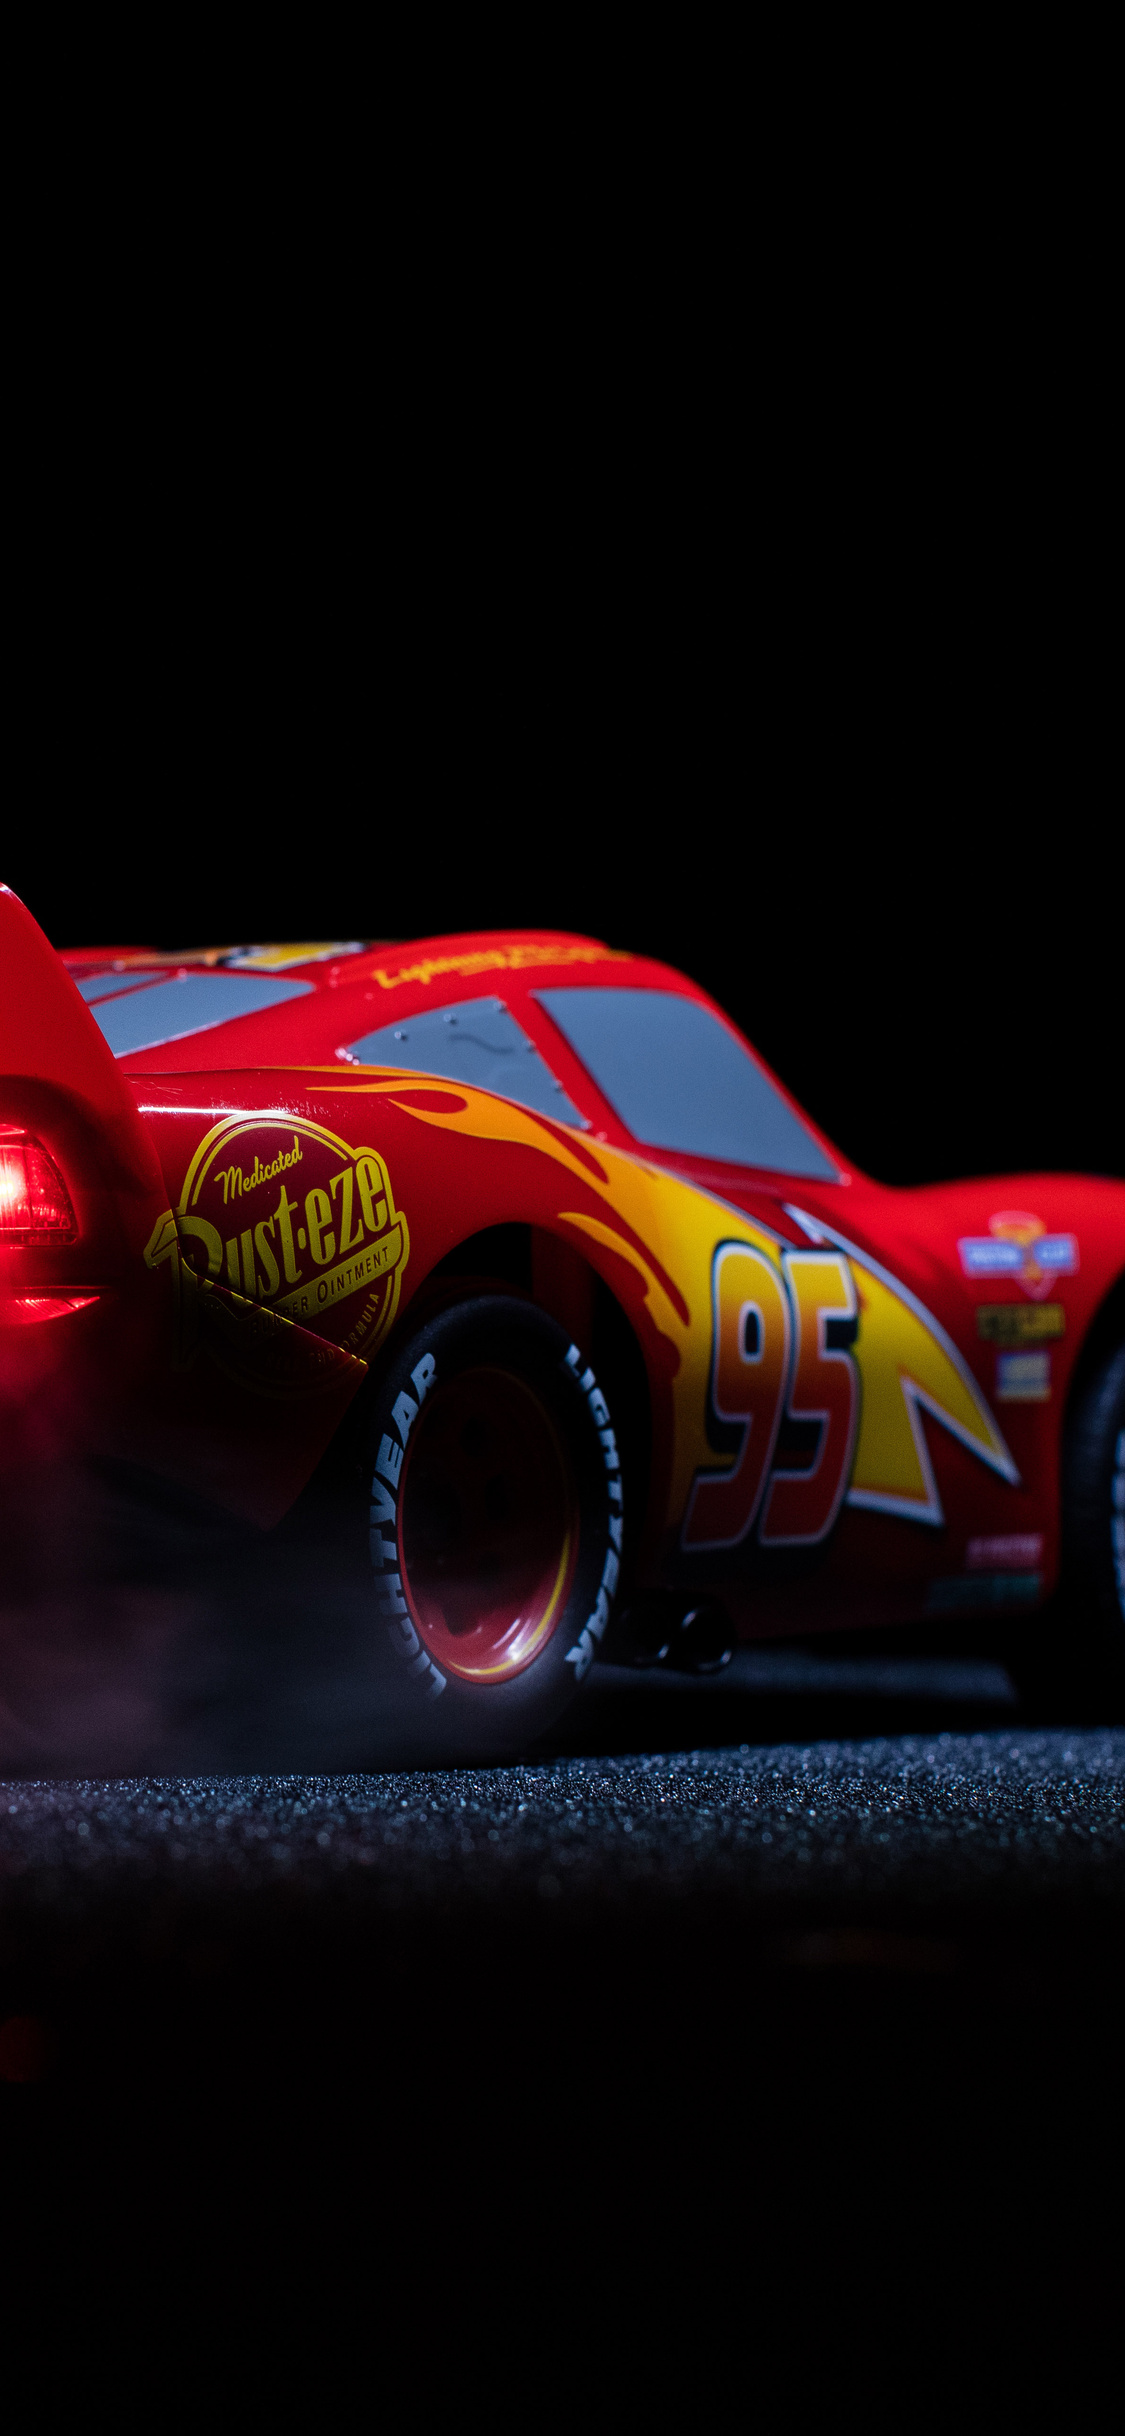 Lightning McQueen Cars 3 Pixar Disney 4k iPhone XS, iPhone iPhone X , HD 4k Wallpaper, Image, Background, Photos and Picture